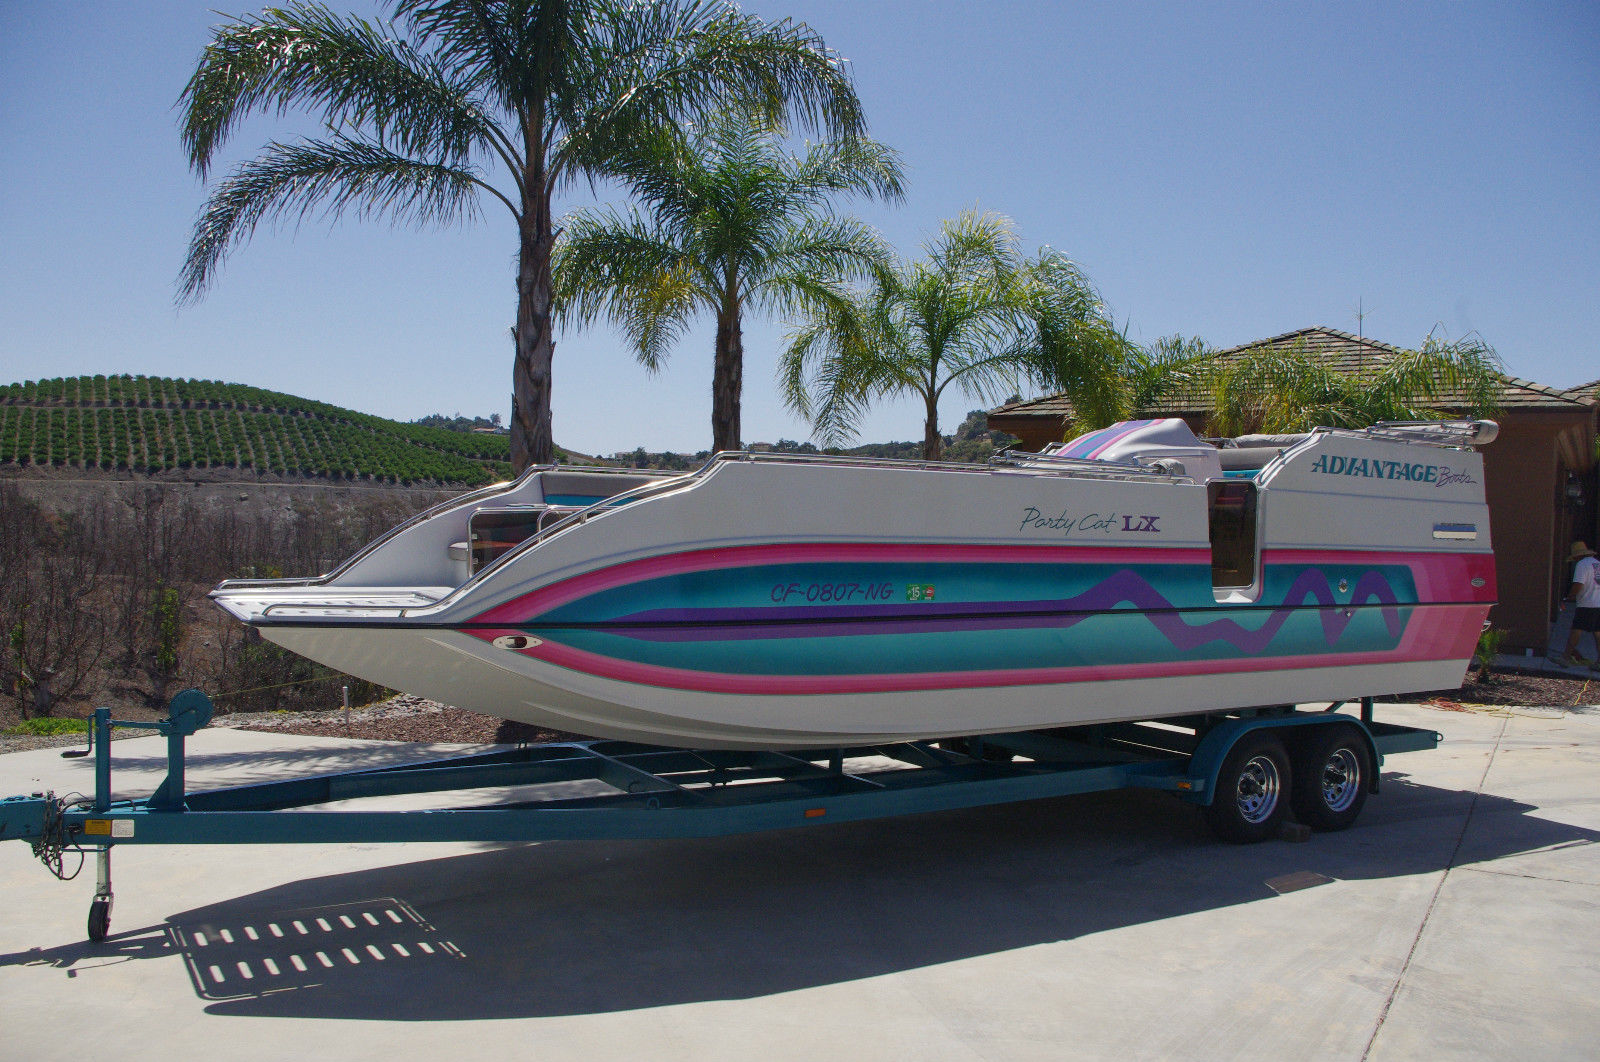 Advantage Party Cat LX 26' Deck Boat 1992 for sale for ...